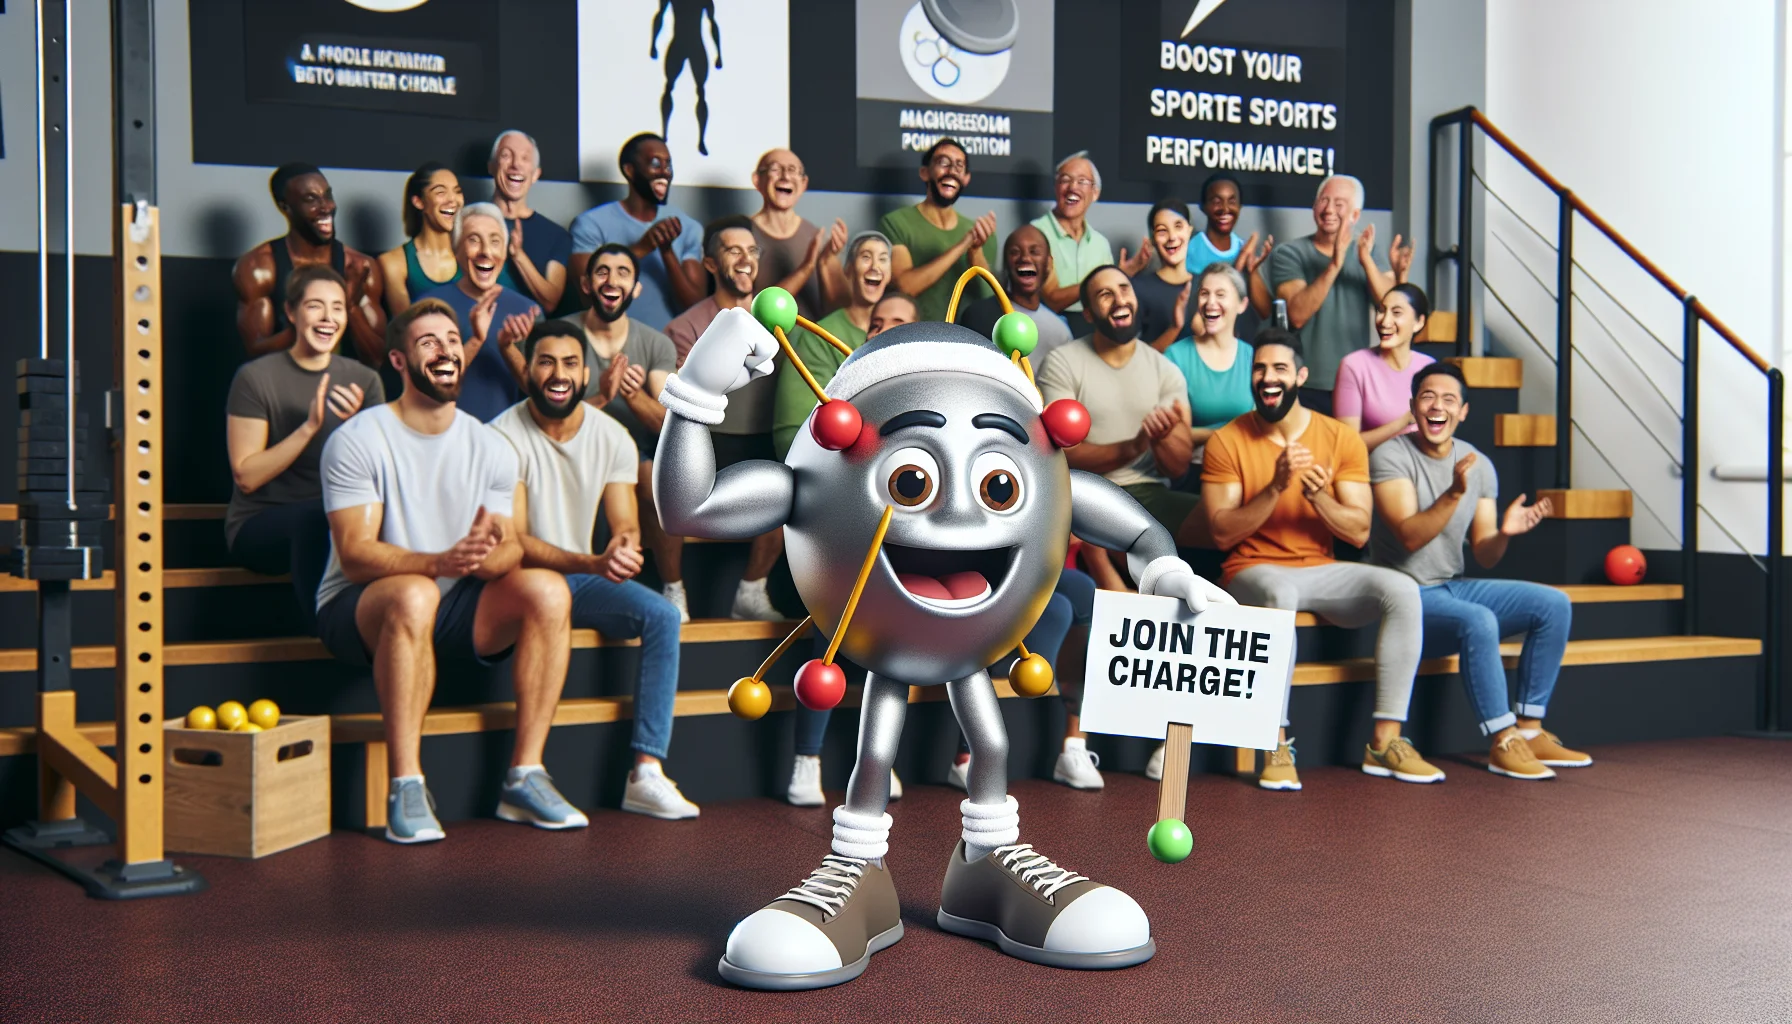 Create a humorous image set in a gym. In the central foreground, imagine an anthropomorphic Magnesium atom character, showing a positive charge, smiling and flexing its muscles. It's wearing a sweatband and holding a sign that reads, 'Join the Charge! Boost Your Sports Performance!' Spectators, consisting of a diverse mix of men and women of various descents such as Caucasian, Hispanic, Black, Middle-Eastern, and South Asian, are laughing and applauding in the background.